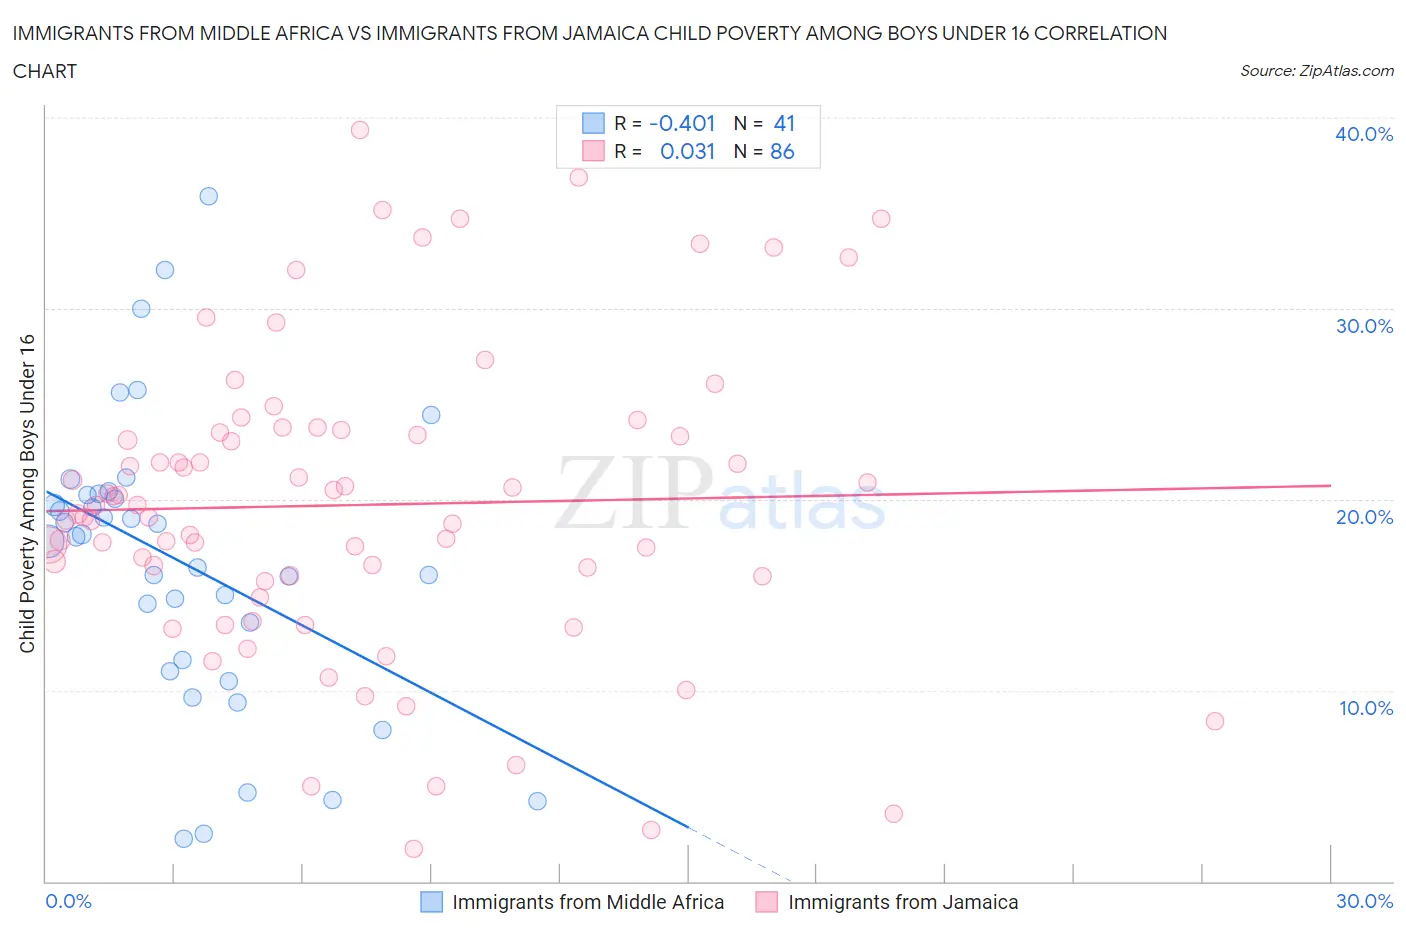 Immigrants from Middle Africa vs Immigrants from Jamaica Child Poverty Among Boys Under 16